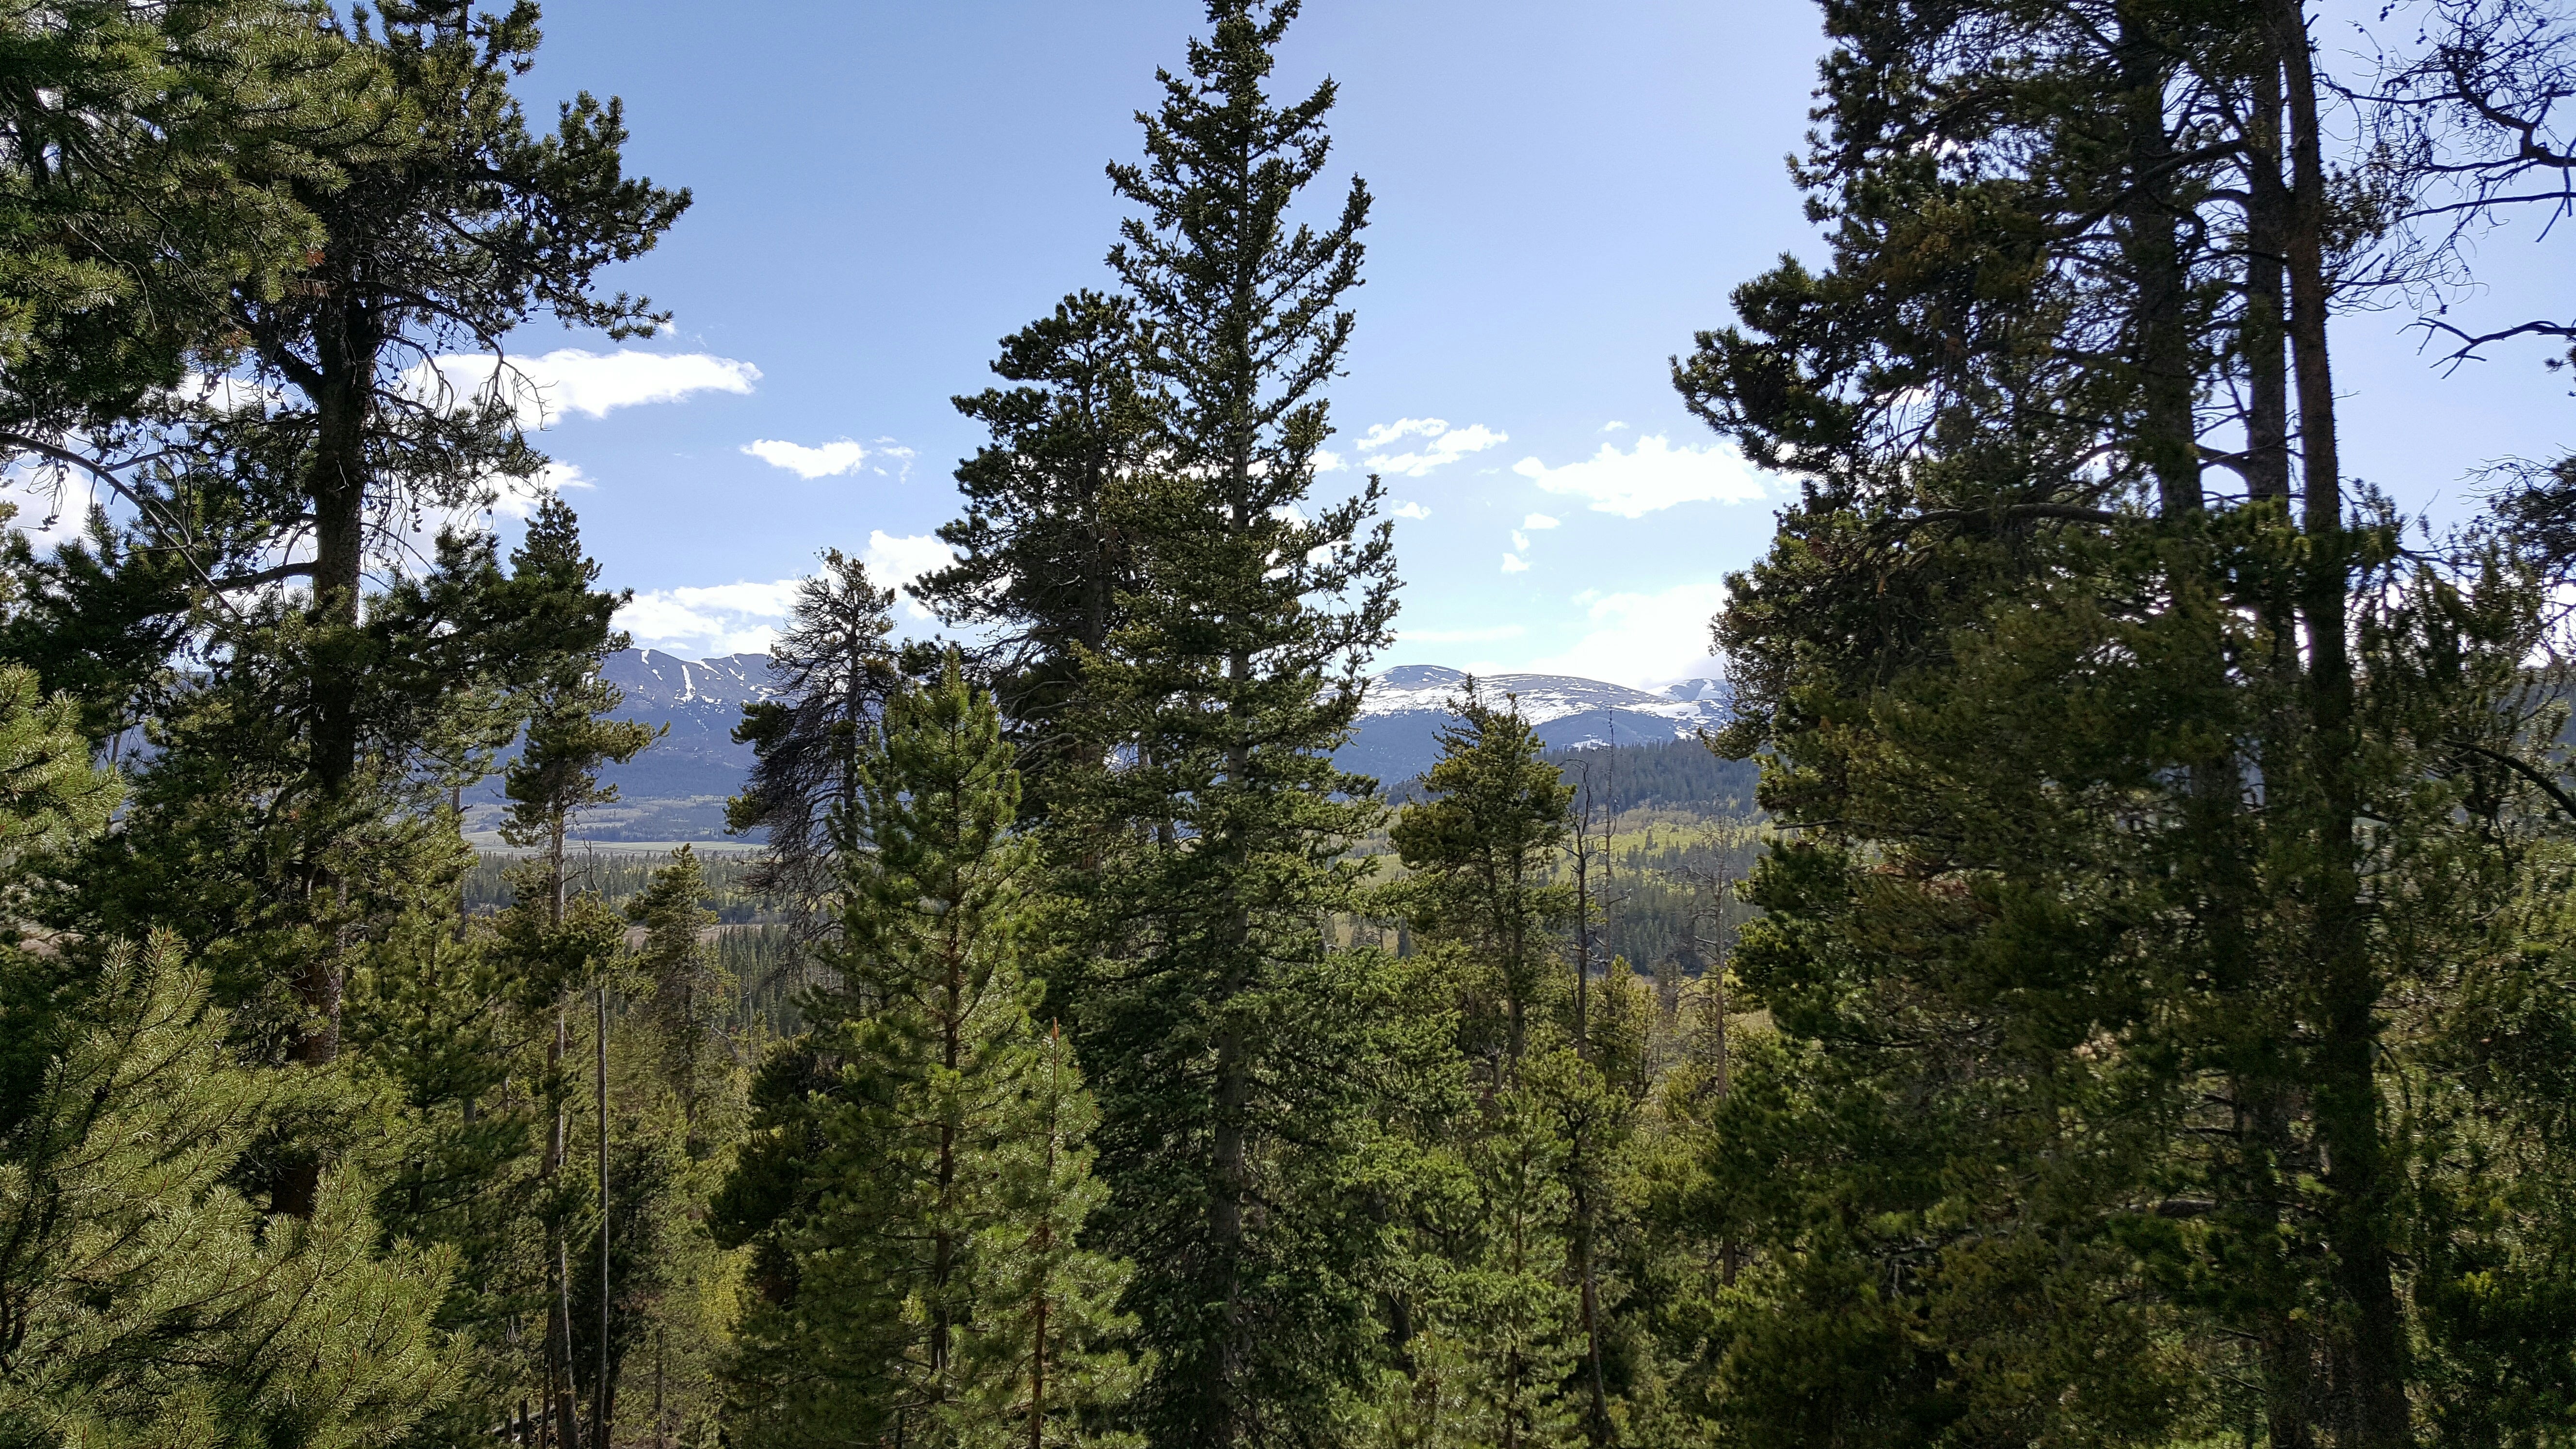 A view from a hike on an old forest service road.